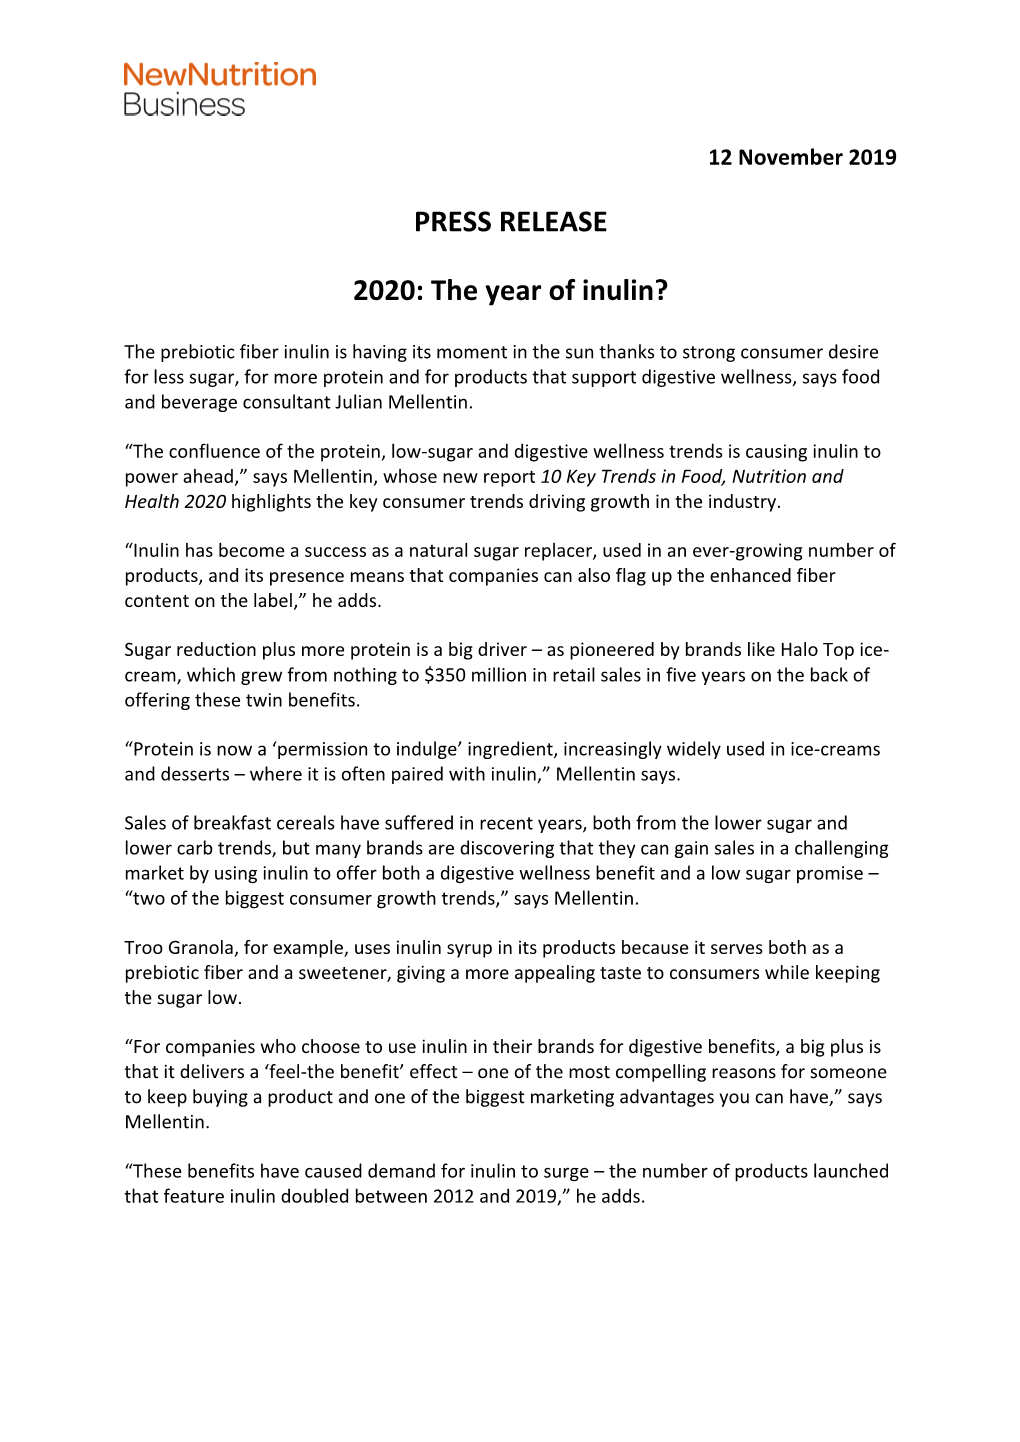 PRESS RELEASE 2020: the Year of Inulin?